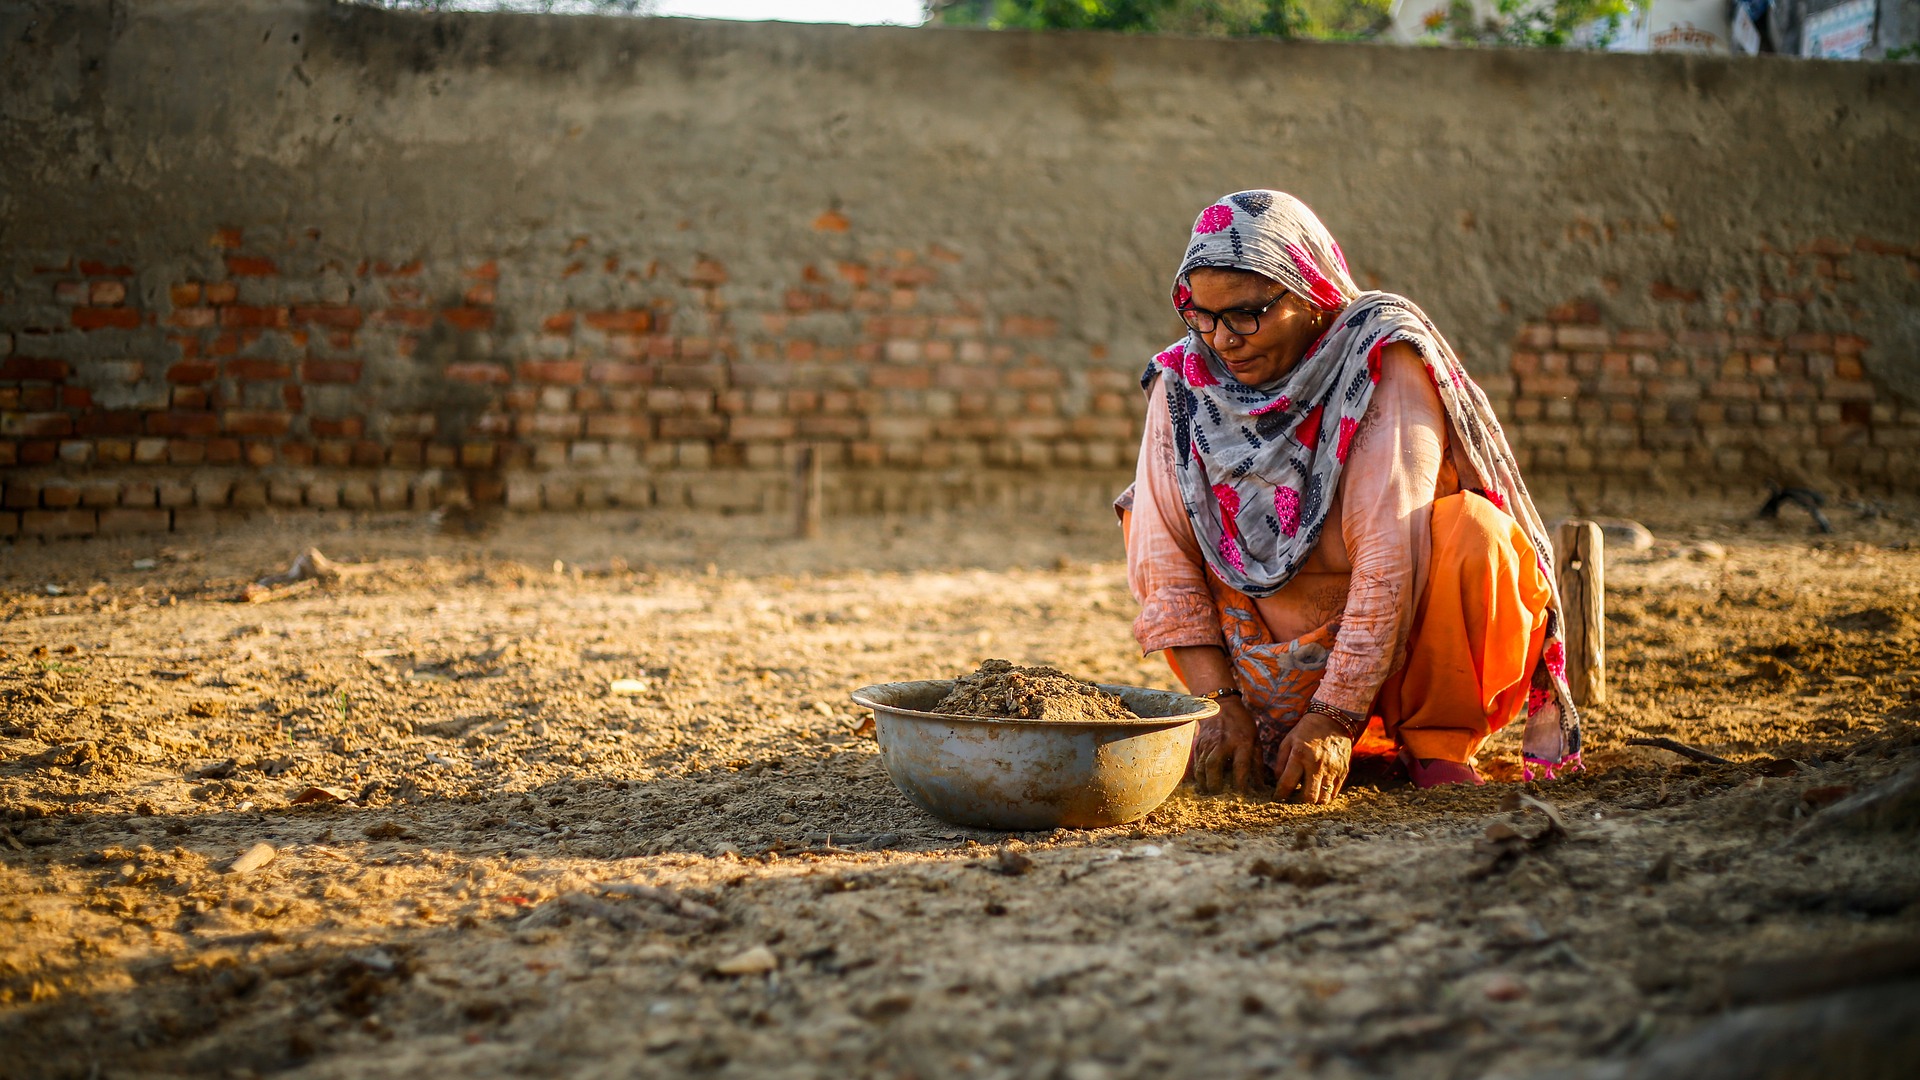 A rural Indian woman at work